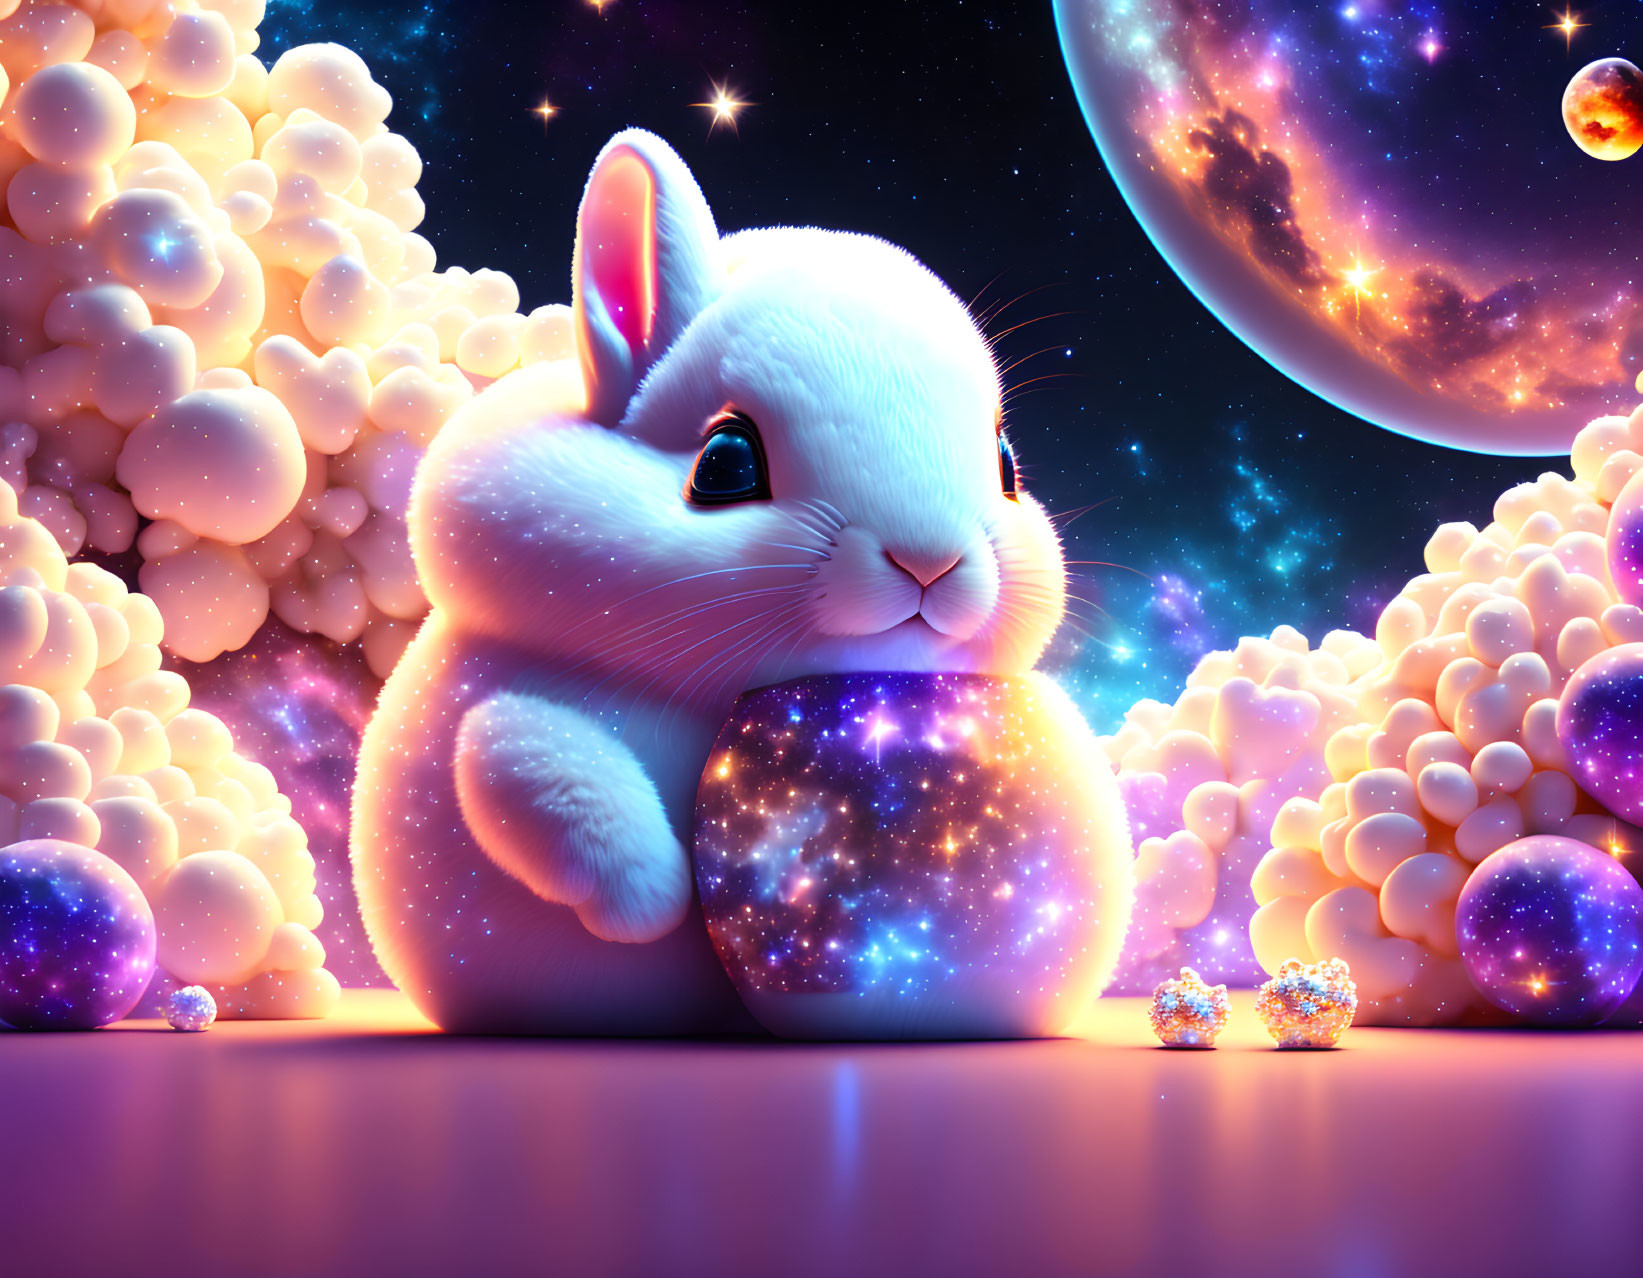 Fluffy white rabbit with galaxy crystal ball in dreamy celestial landscape